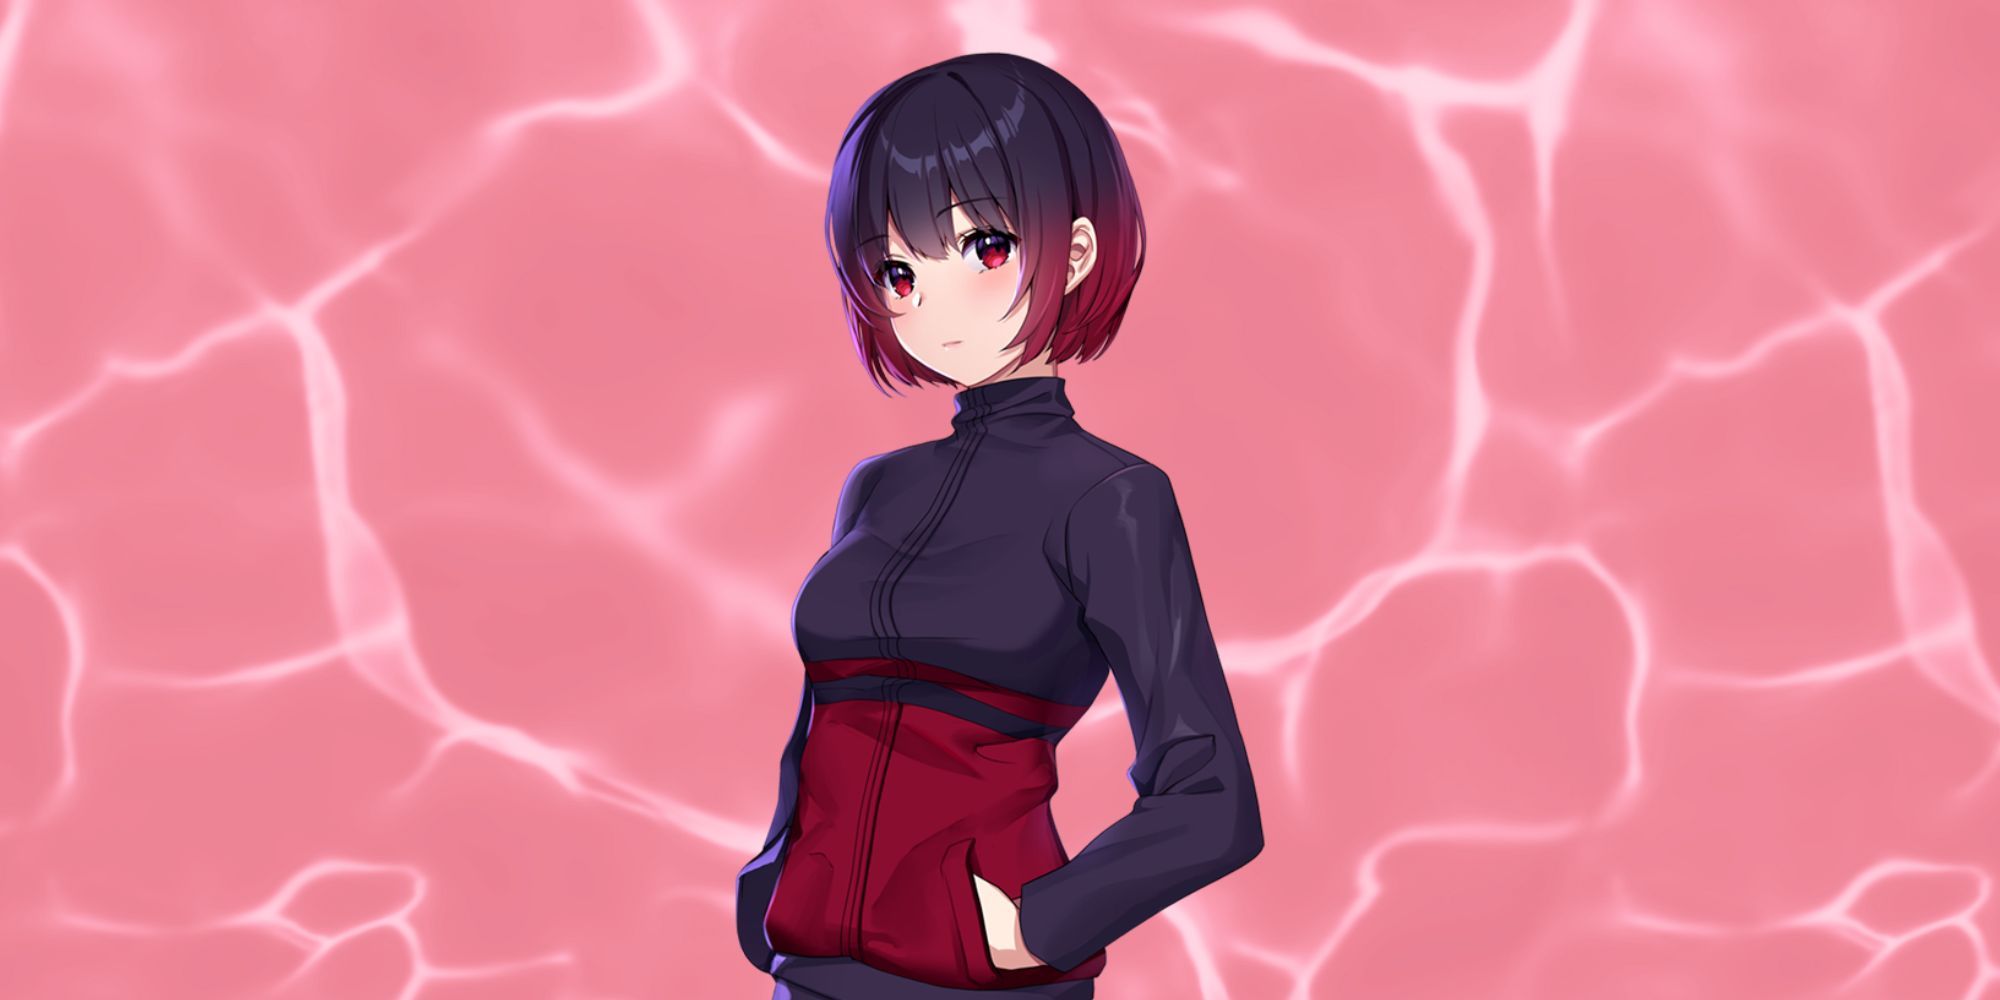 Min posing with a red background in Eternights.